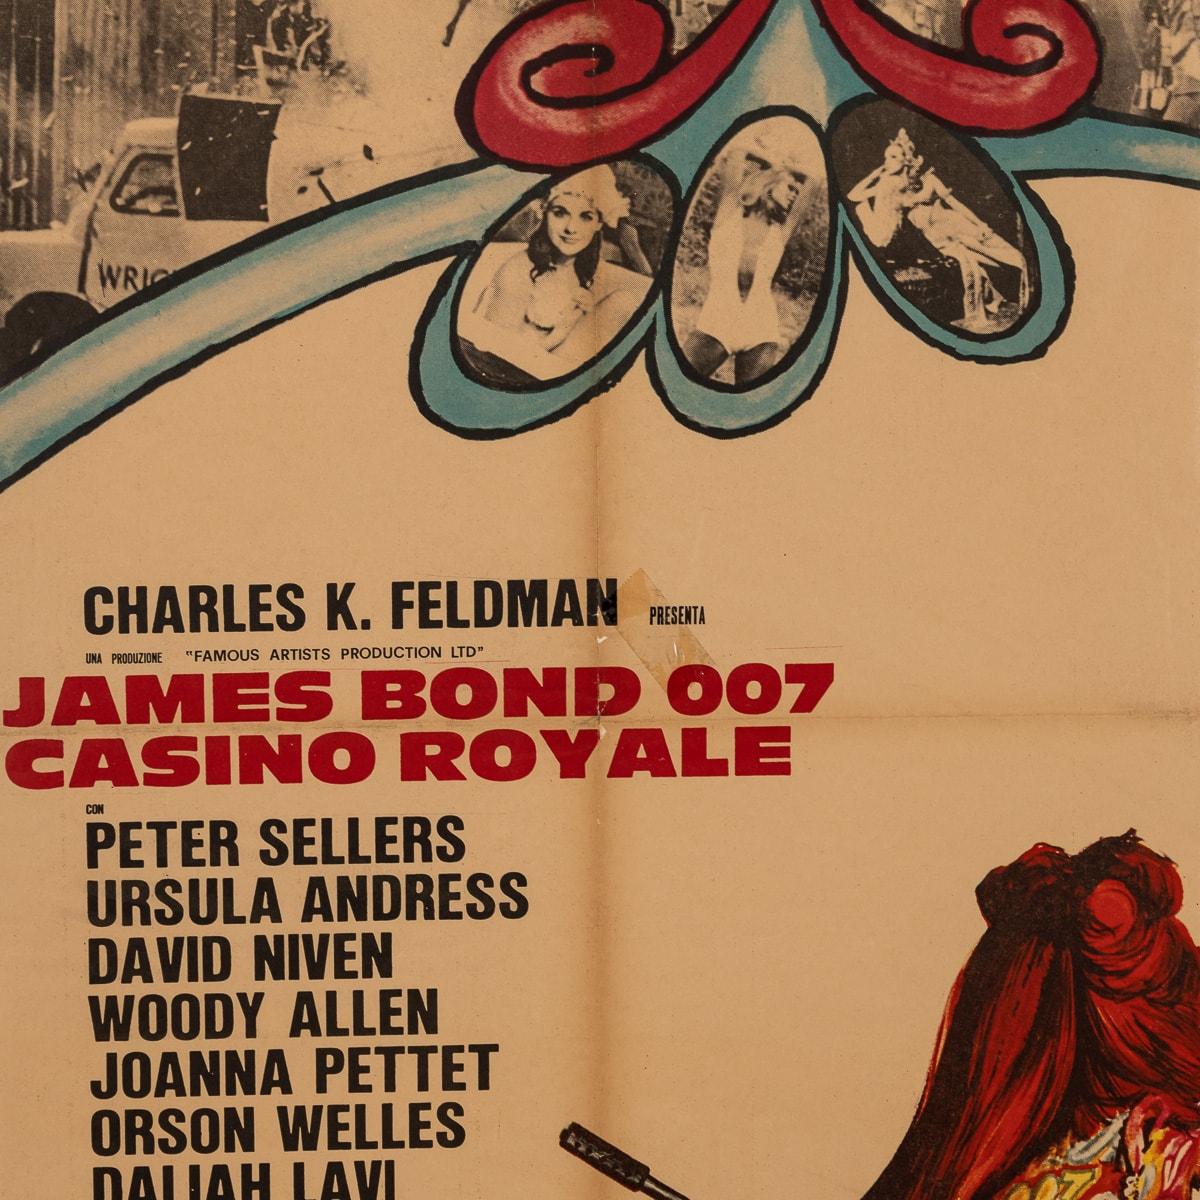 A Framed Original James Bond 007 'Casino Royale' Movie Poster, c.1967 In Good Condition For Sale In Royal Tunbridge Wells, Kent